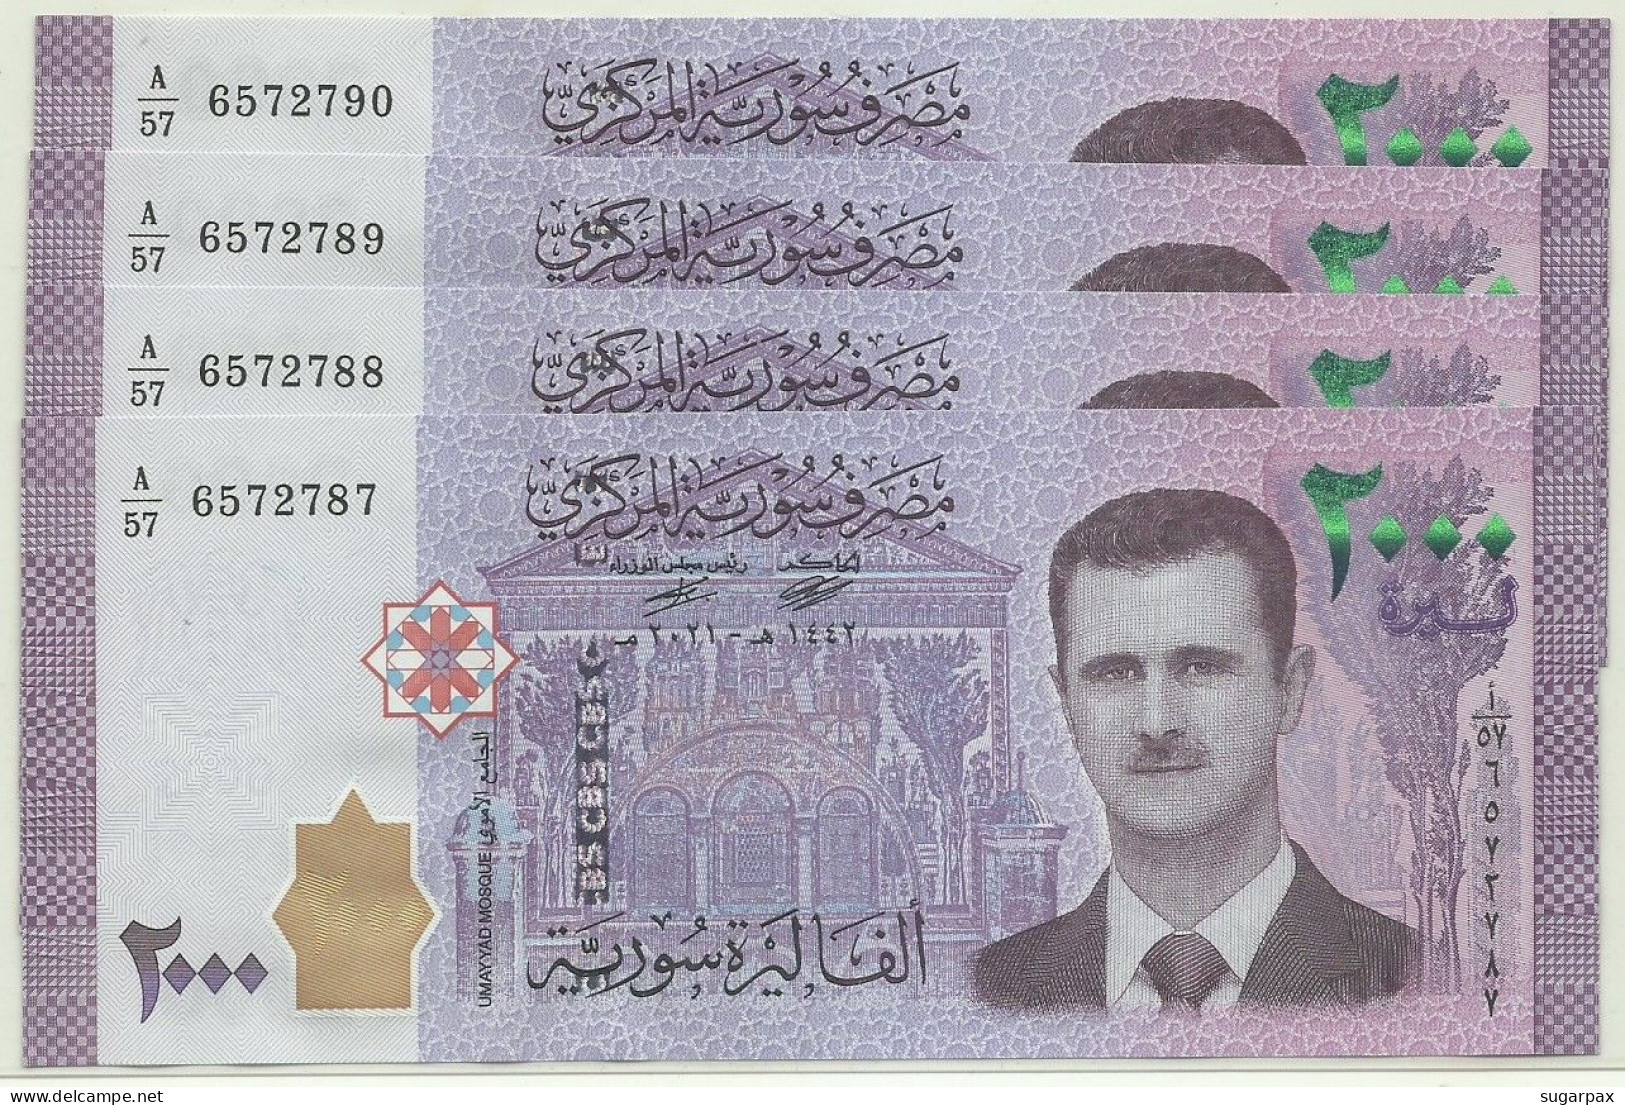 Syria - 4 X 2000 Syrian Pounds - 2021 / AH 1442 - Pick 117.NEW - Unc. - Serie A/57 - 2.000 - Syrien